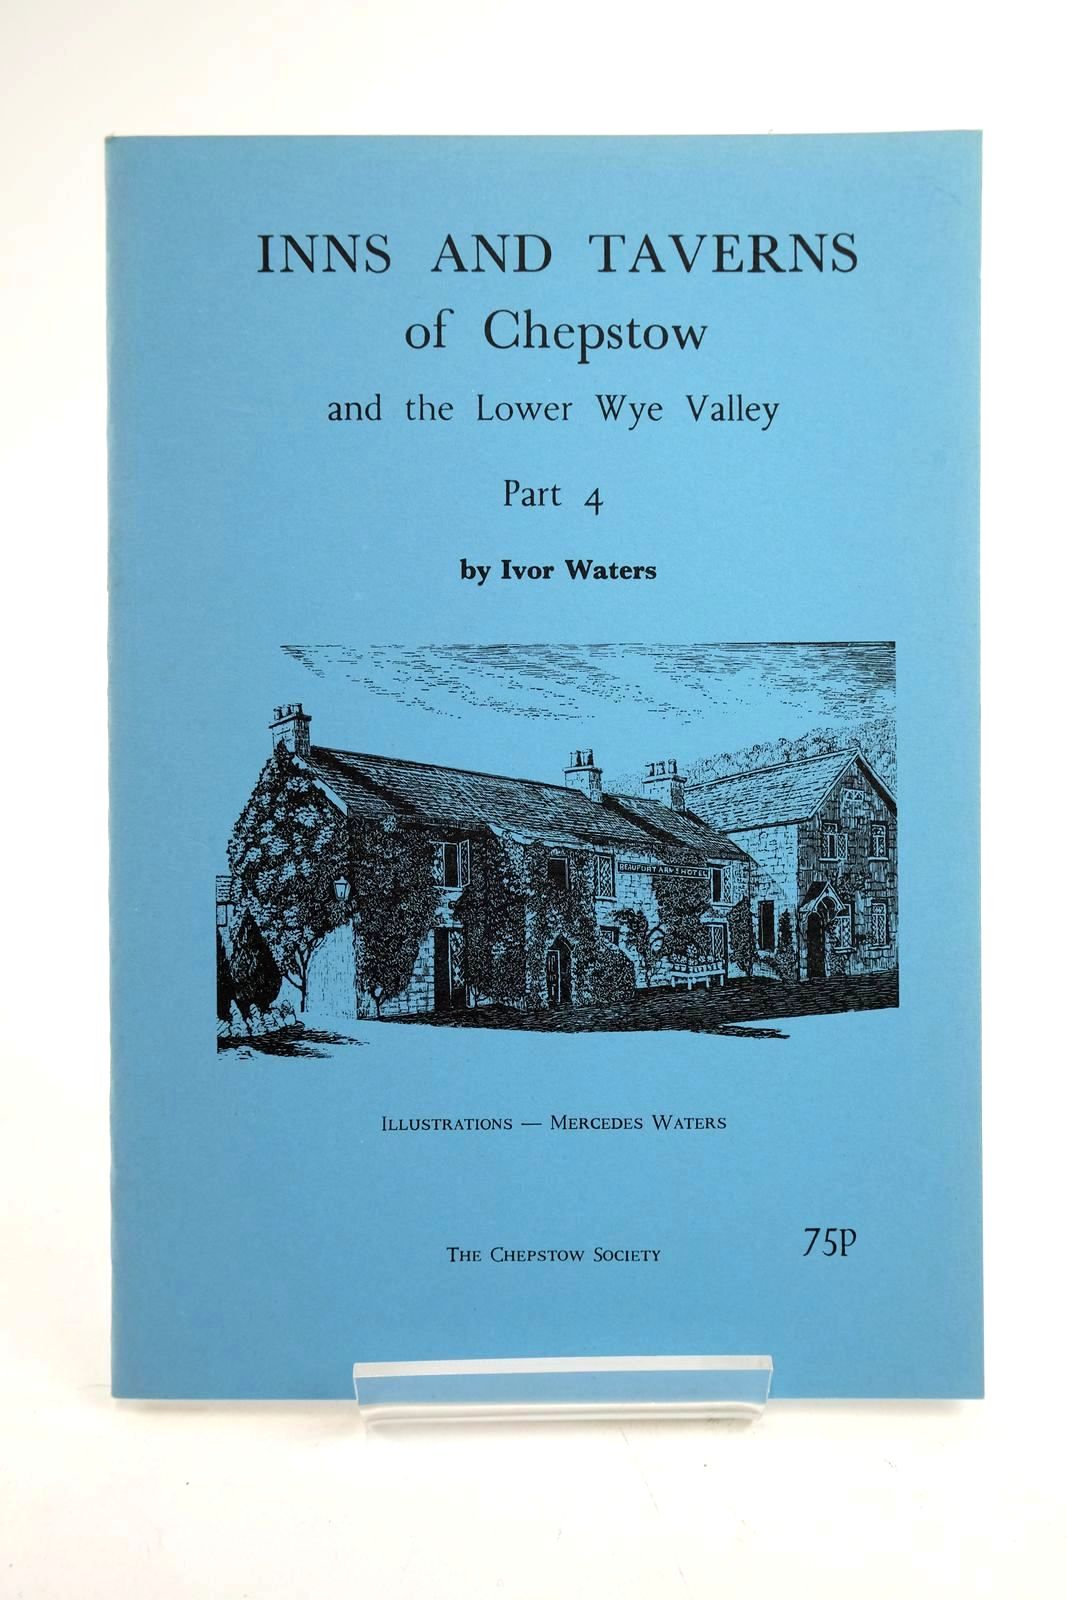 Photo of INNS AND TAVERNS OF CHEPSTOW AND THE LOWER WYE VALLEY PART 4 written by Waters, Ivor illustrated by Waters, Mercedes published by The Chepstow Society (STOCK CODE: 1319535)  for sale by Stella & Rose's Books